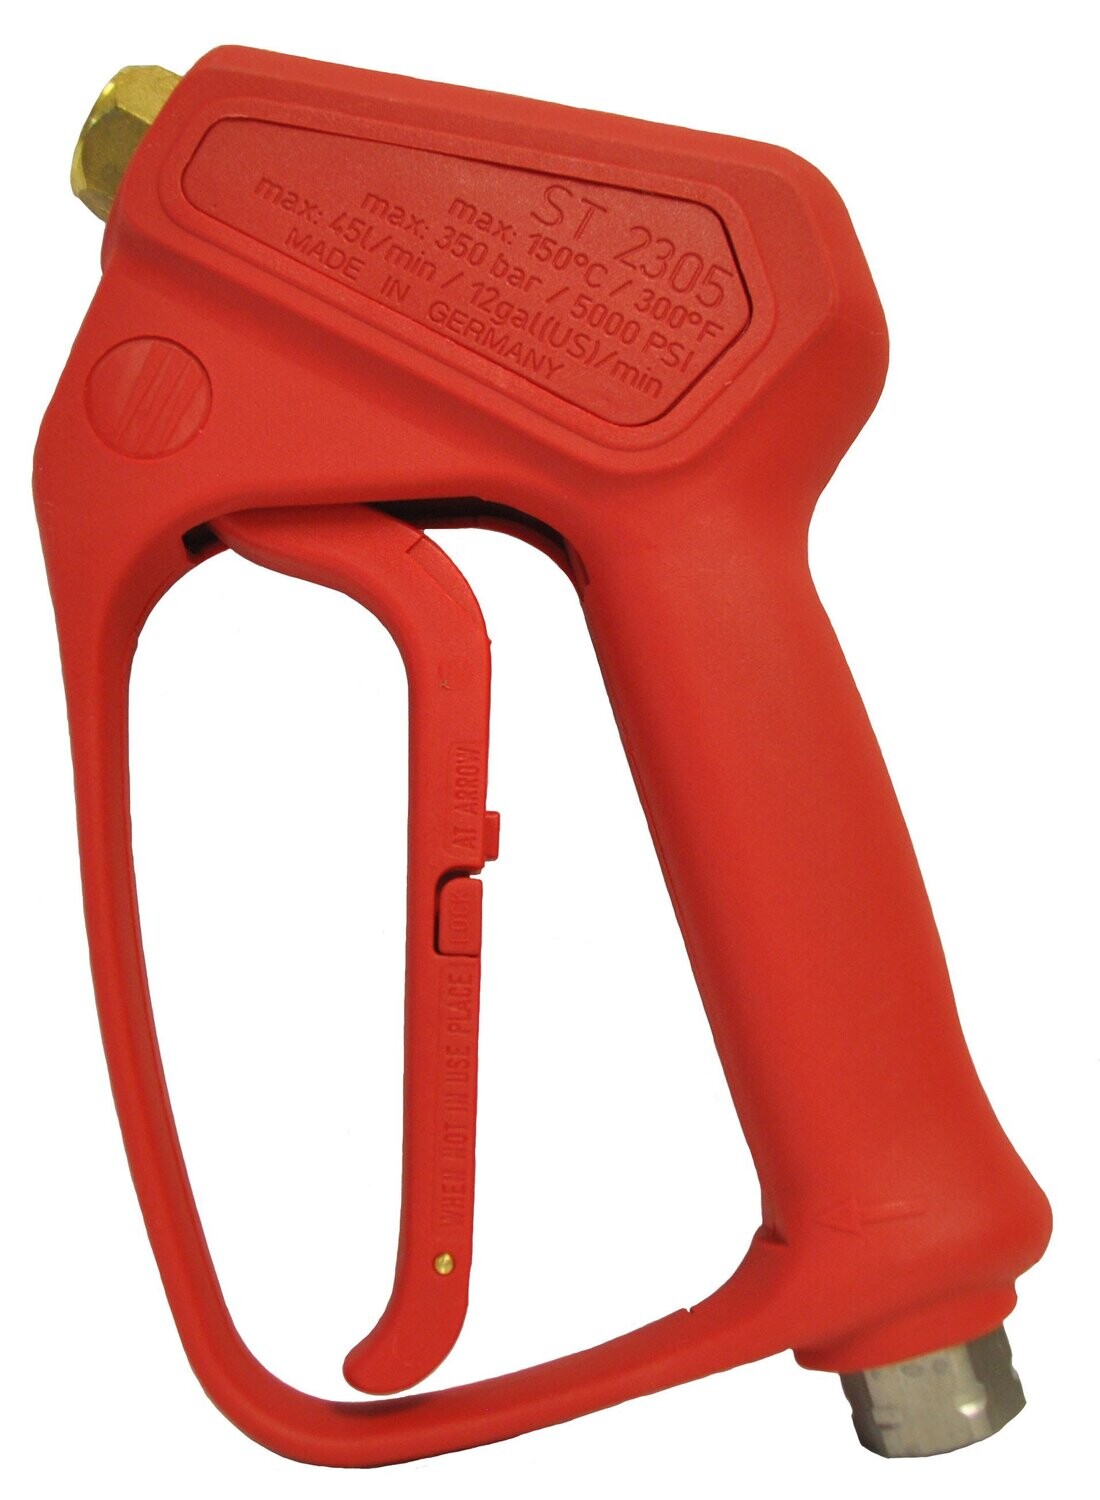 Easy to Pull Red ​Industrial Suttner Pressure Washer Trigger Spray Gun 5000 PSI 12 GPM model (ST-2305)